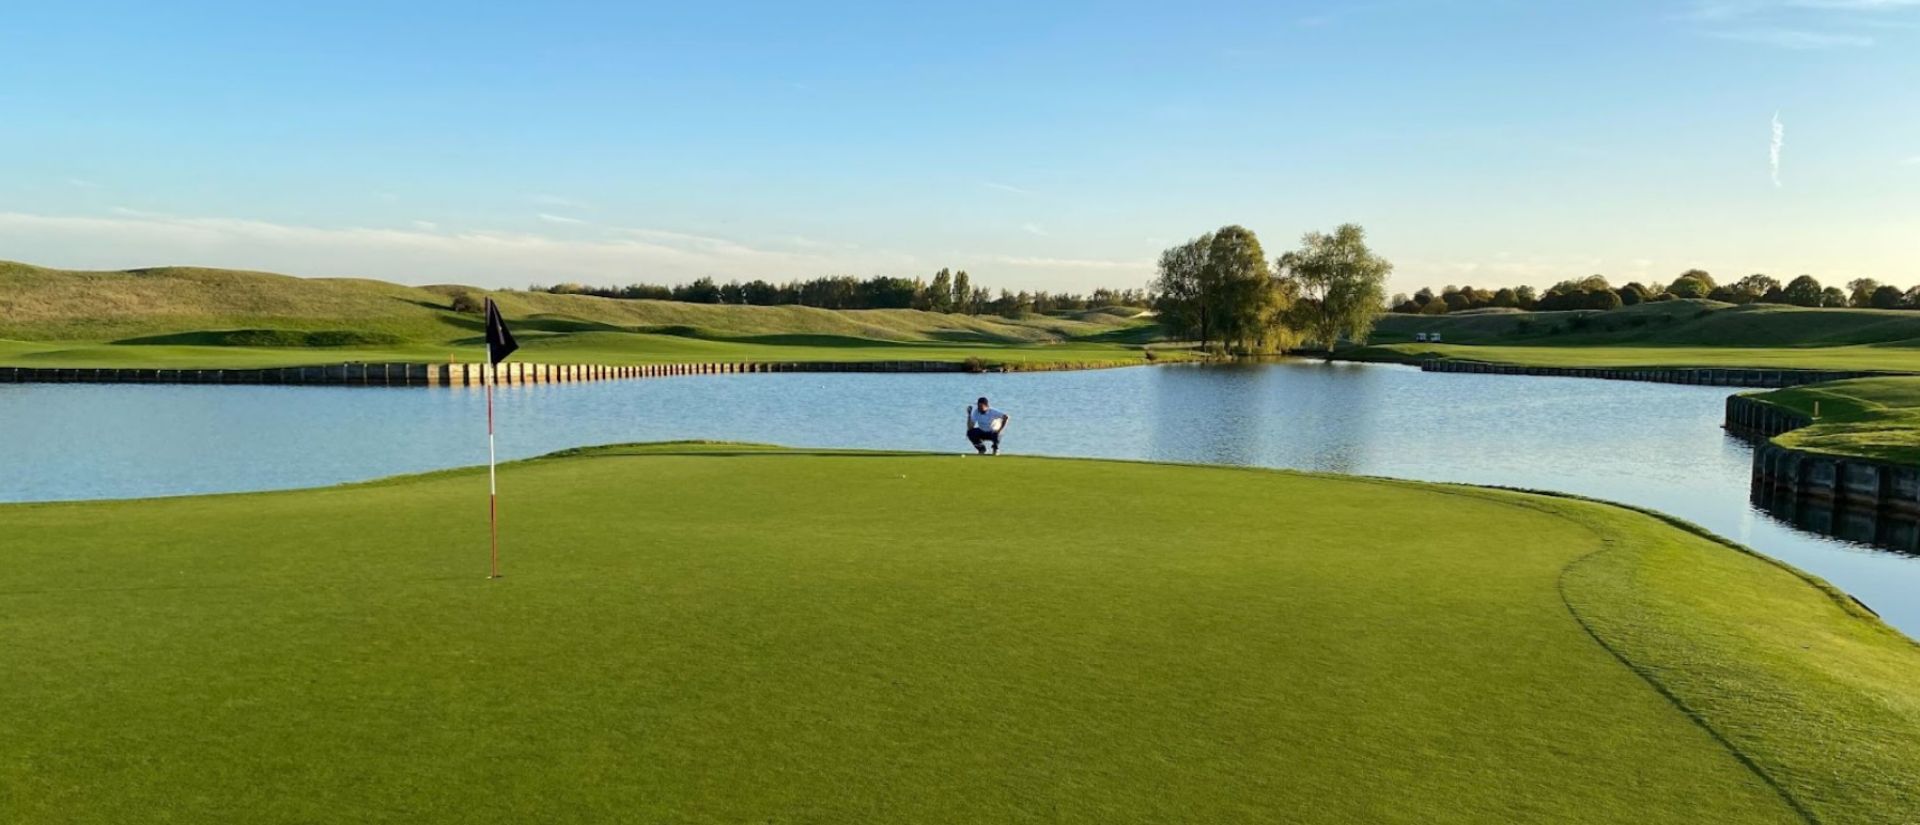 Le Golf National (Albatros)  Golf Course Review — UK Golf Guy